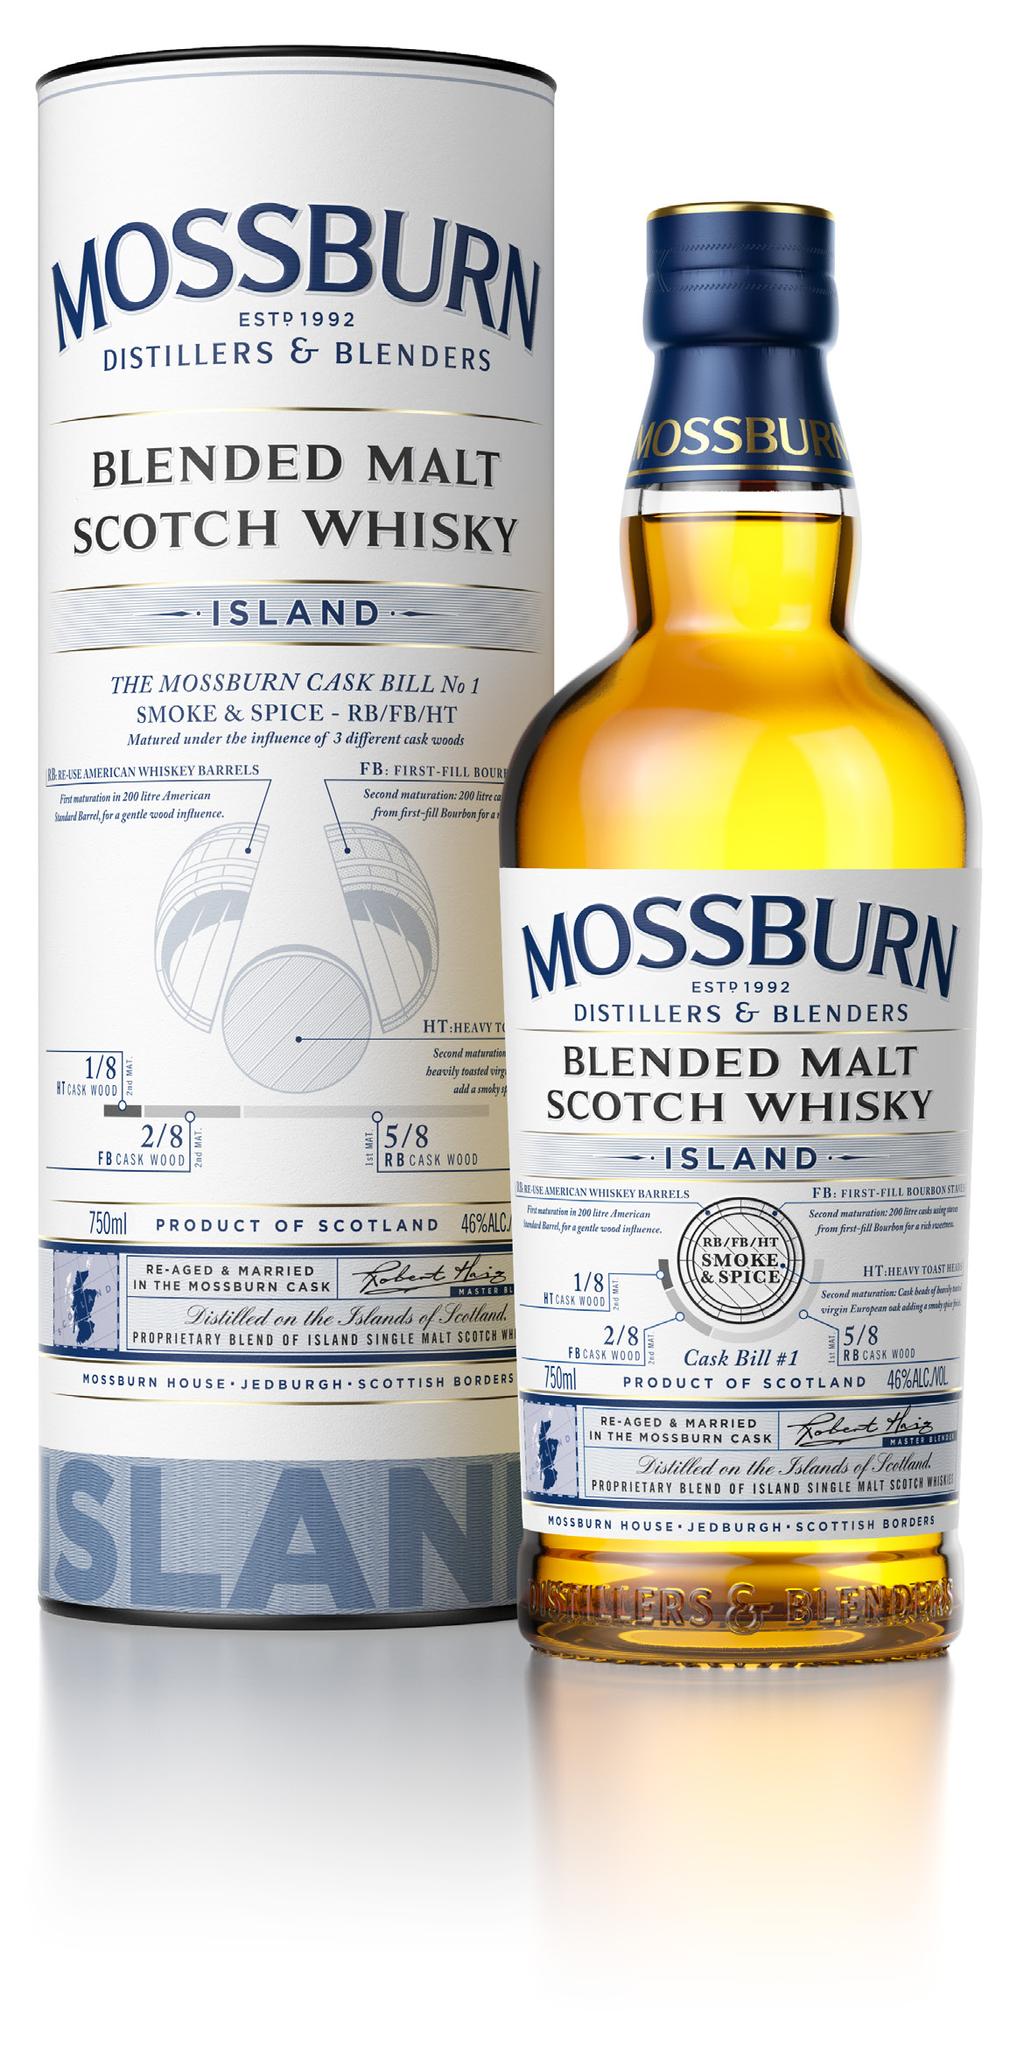 SMOKE and SPICE - RB/FB/HT - Matured under the influence of 3 different cask woods: RB (Re-use American Whisky Barrels) / FB (First-fill Bourbon Staves) / HT (Heavy Toast Heads) The Mossburn